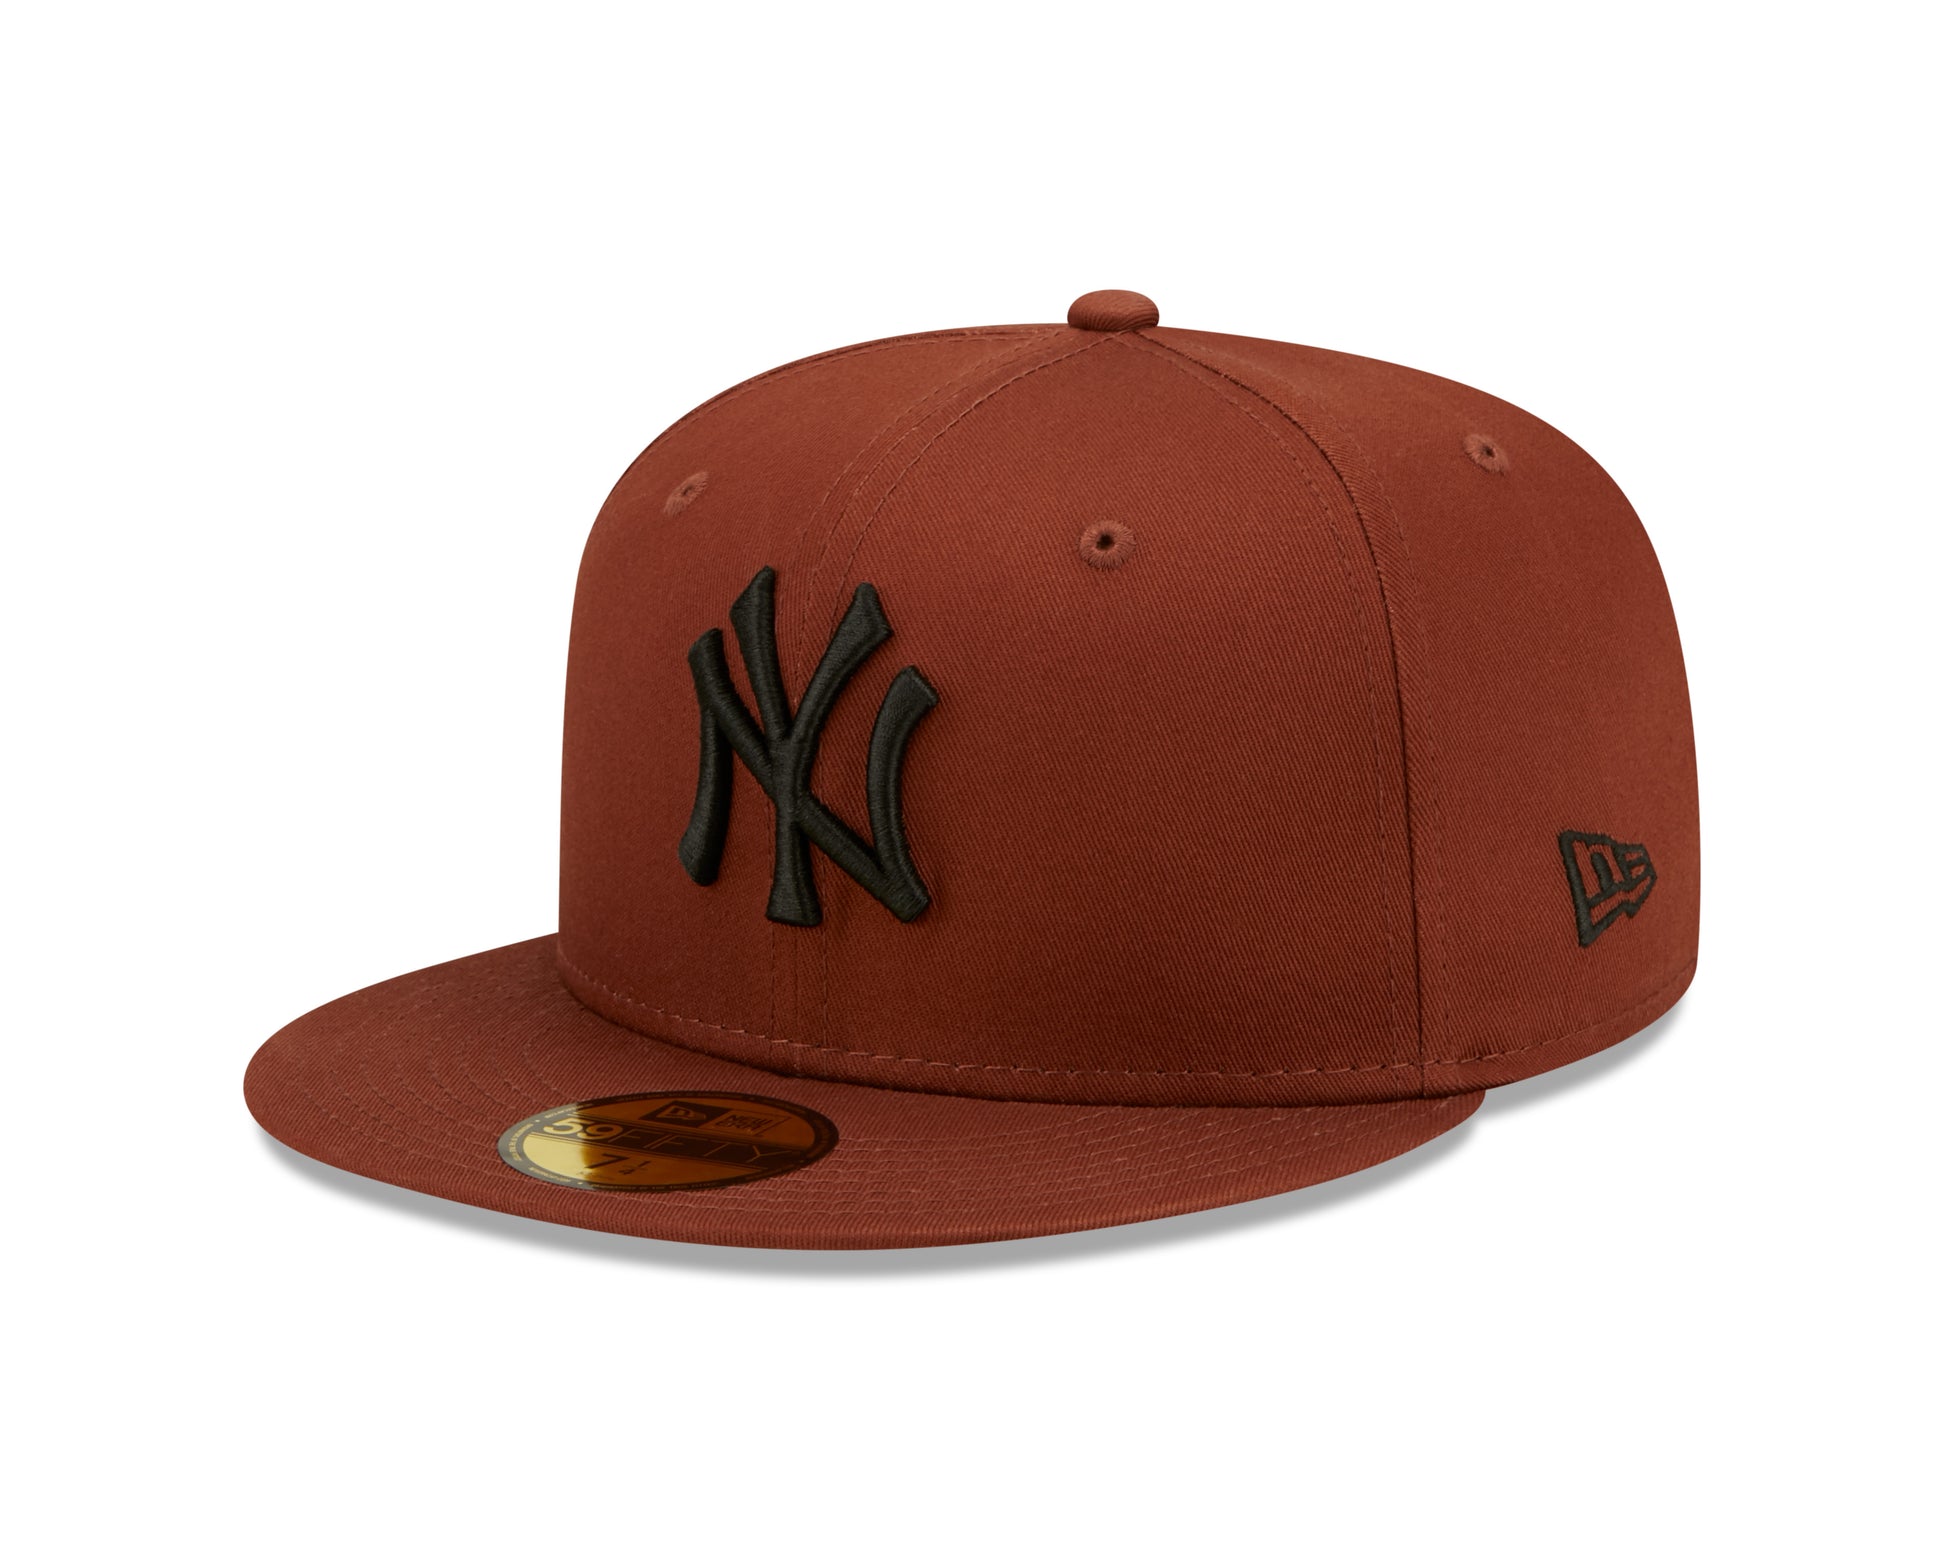 59Fifty Fitted Cap League Essential New York Yankees - Brown/Black - Headz Up 